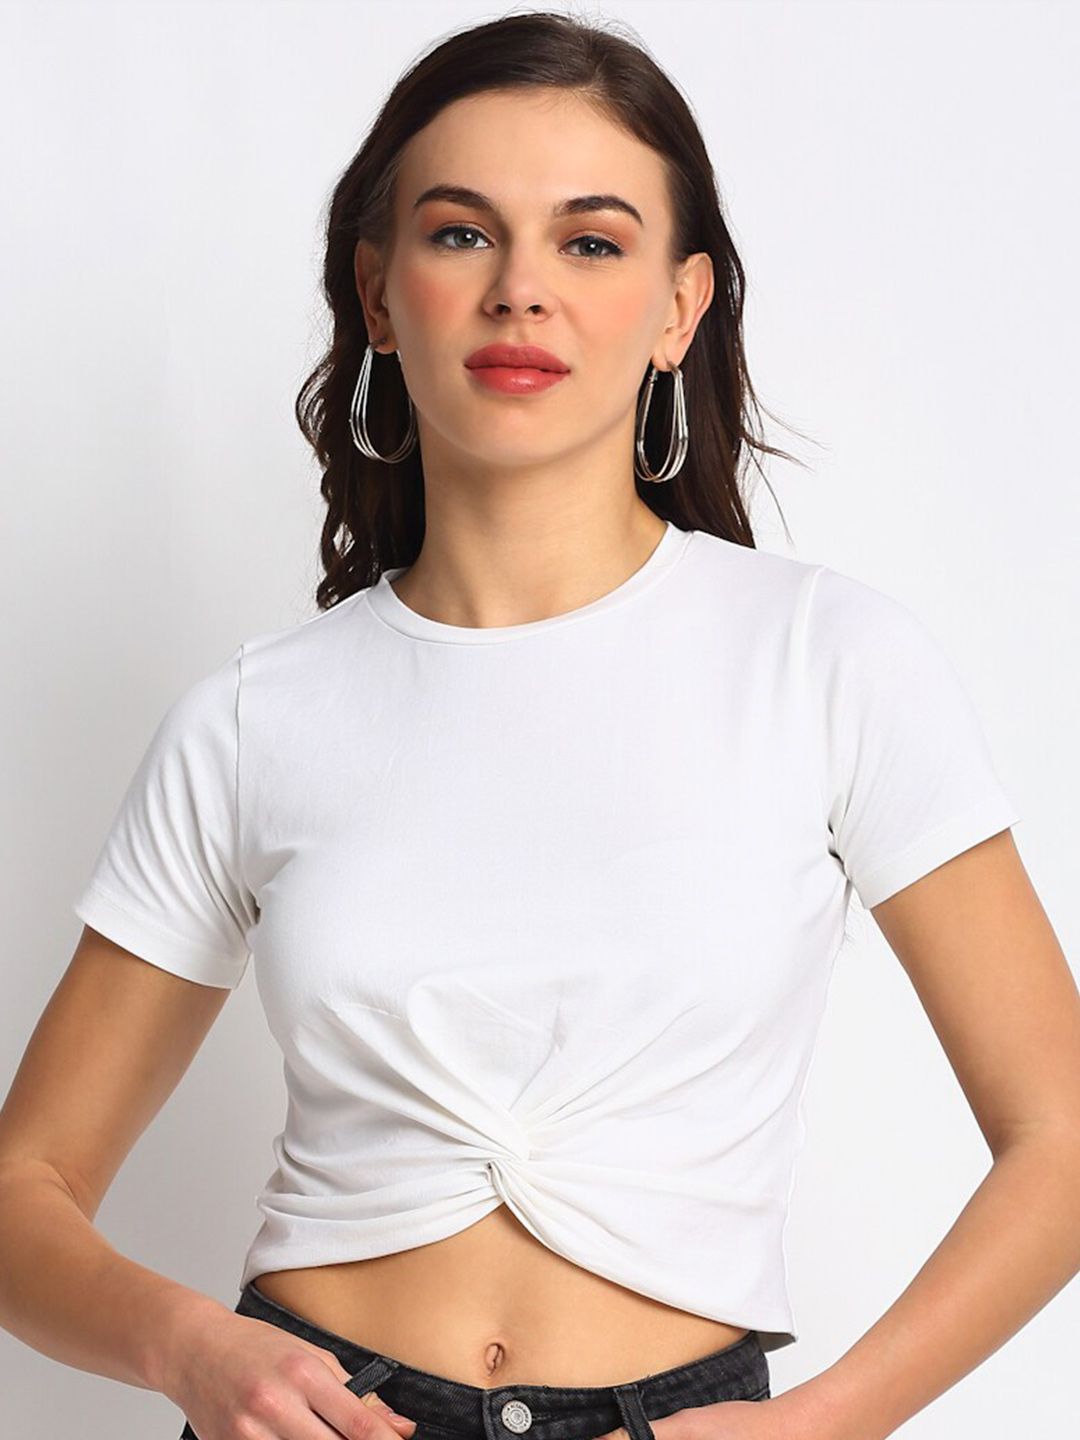 DOOR74 Off White Twisted Crop Top Price in India